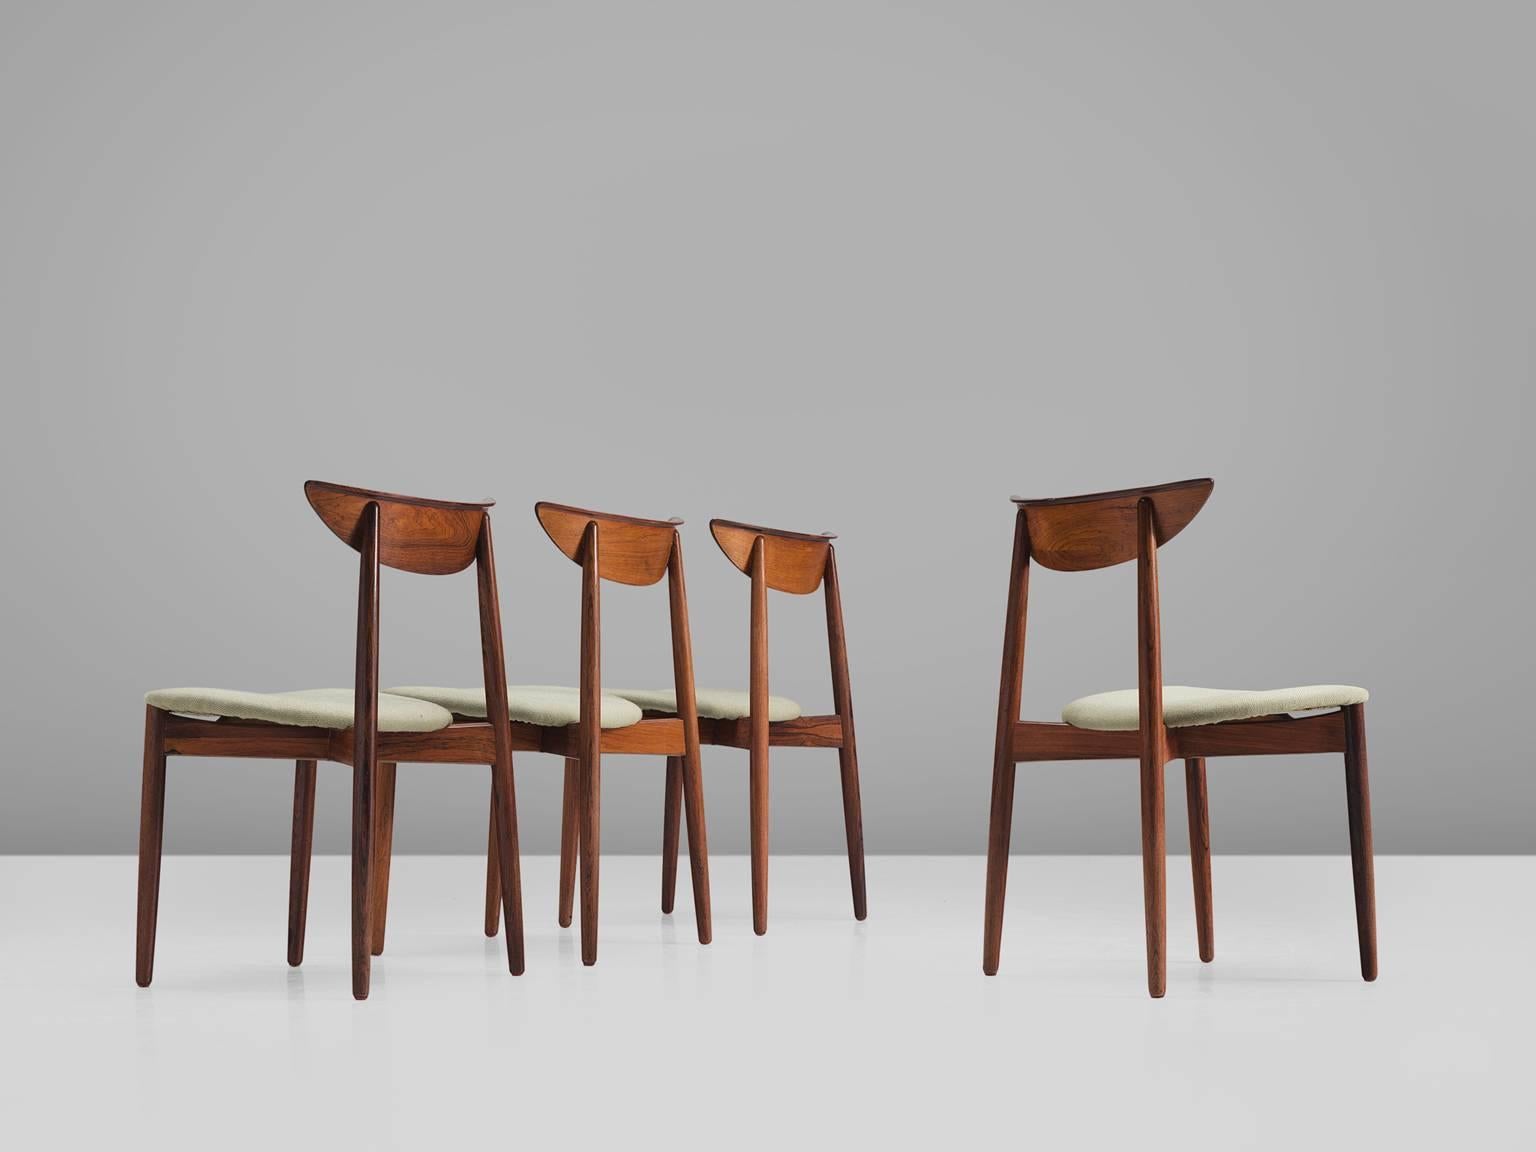 Harry Østergaard, set of four chairs, in rosewood and fabric, Denmark, 1950s. 

Set of four elegant rosewood dining room chairs. A simplistic design in beautiful grained and flamed wood that is especially visible on the curved back rest. These